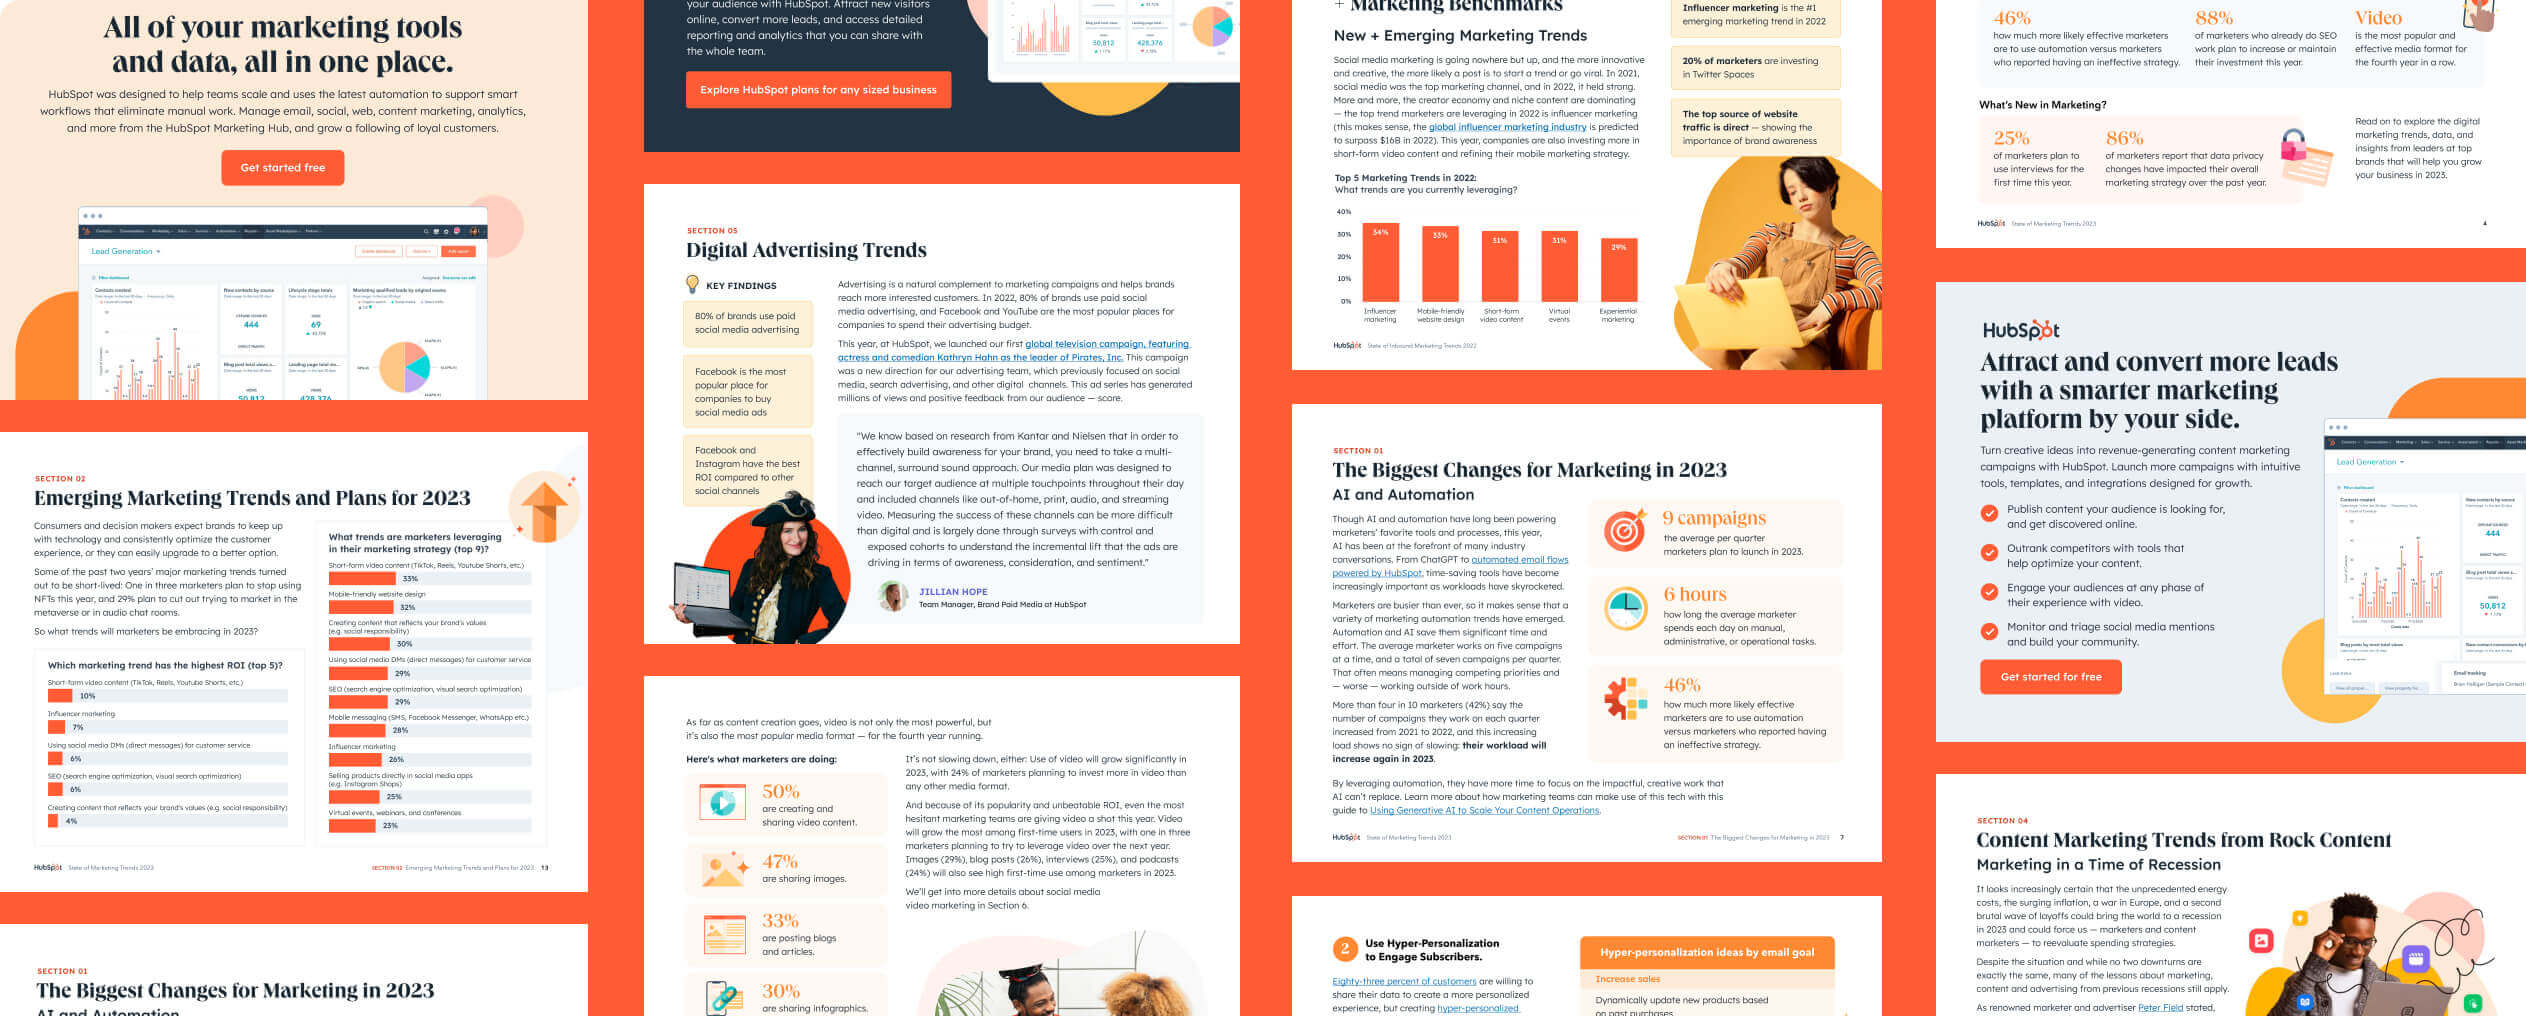 Interior pages of the HubSpot State of Marketing report